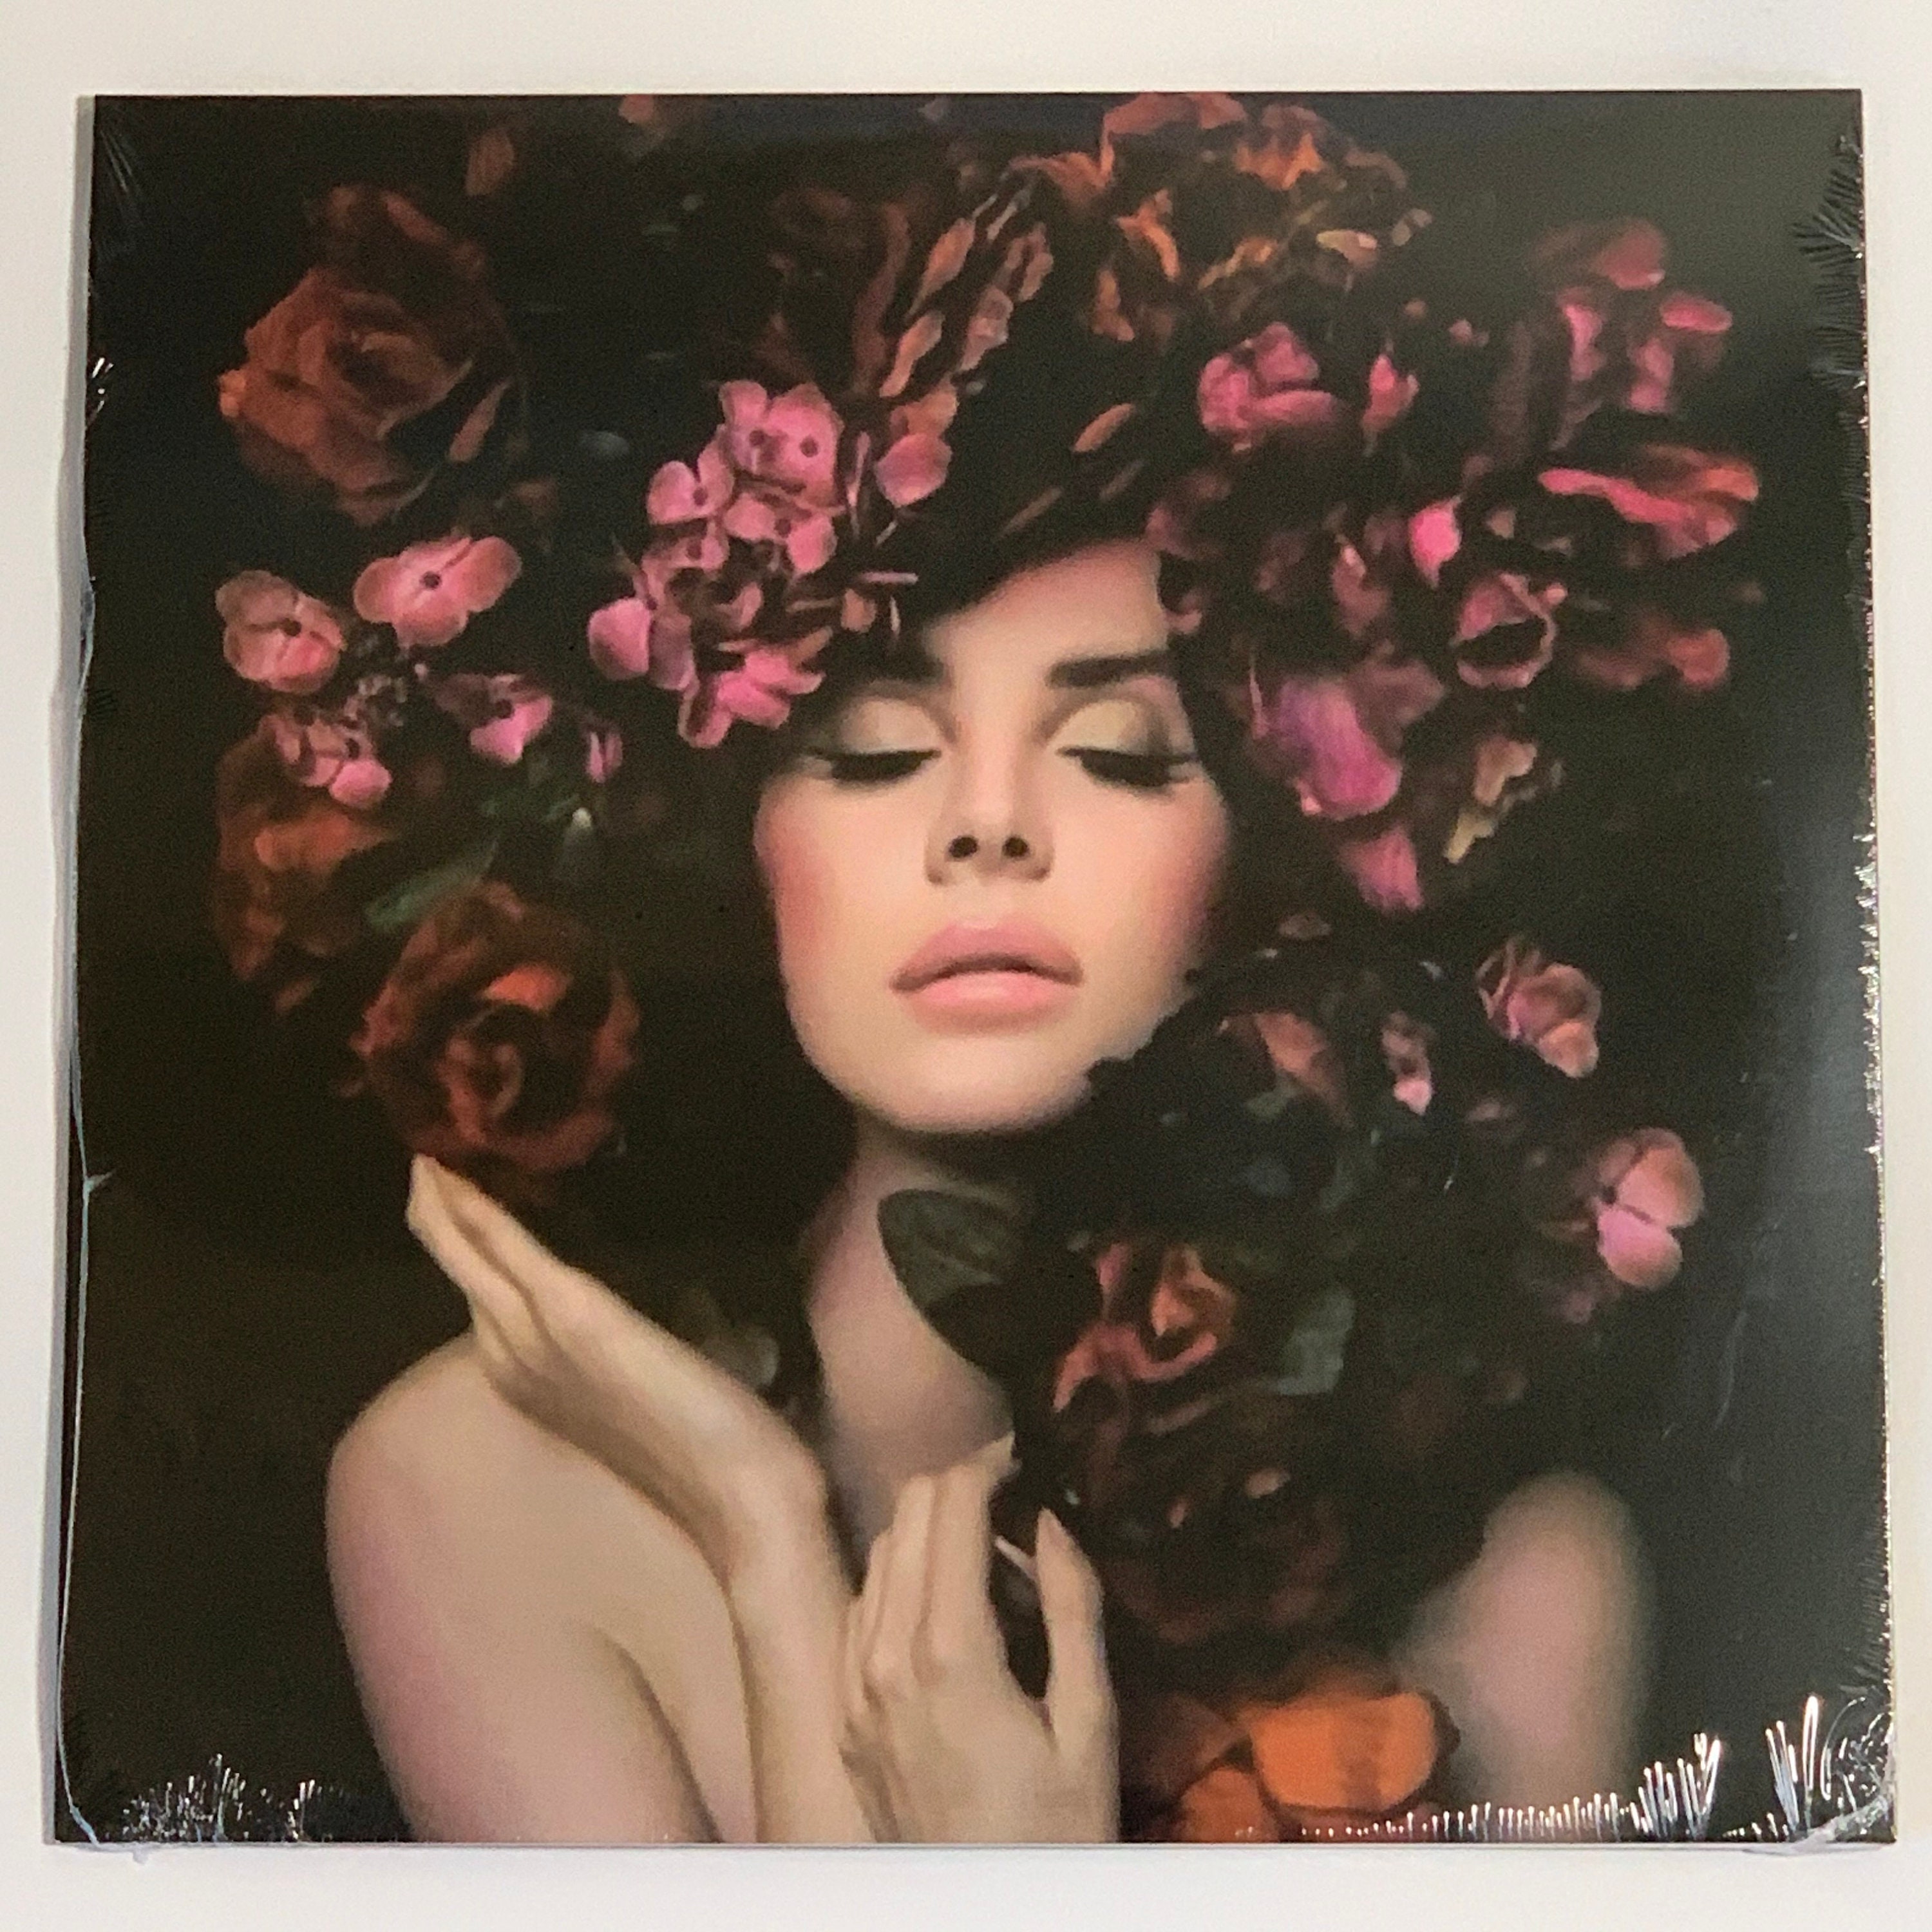 Pin by N on my dear and sweetness, lana del rey  Lana del rey cd, Lana del  rey, Lana del rey vinyl